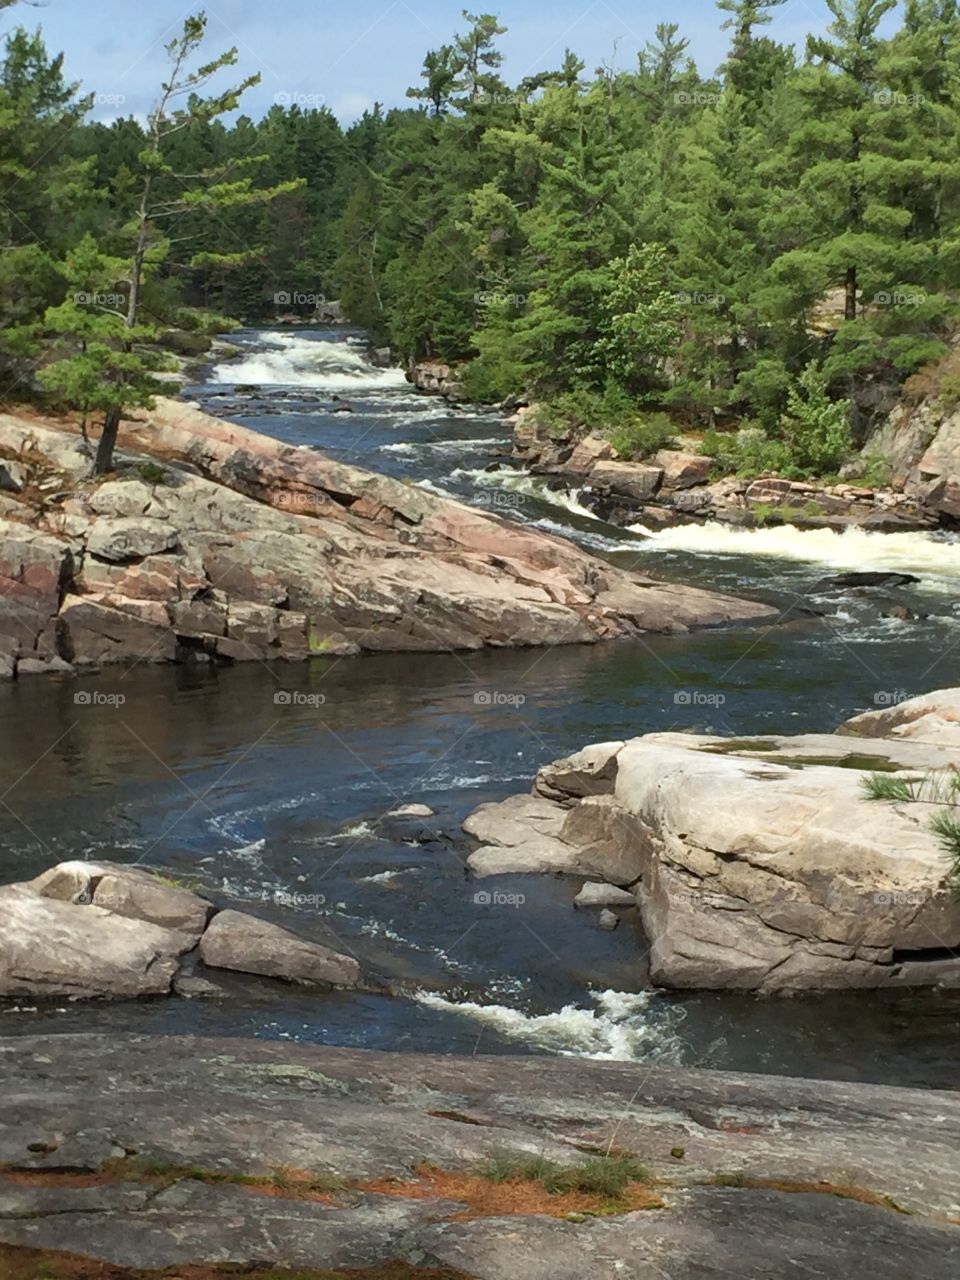 This is the beautiful five finger Rapids on the French River Ontario Canada a must see to enjoy it true beauty.